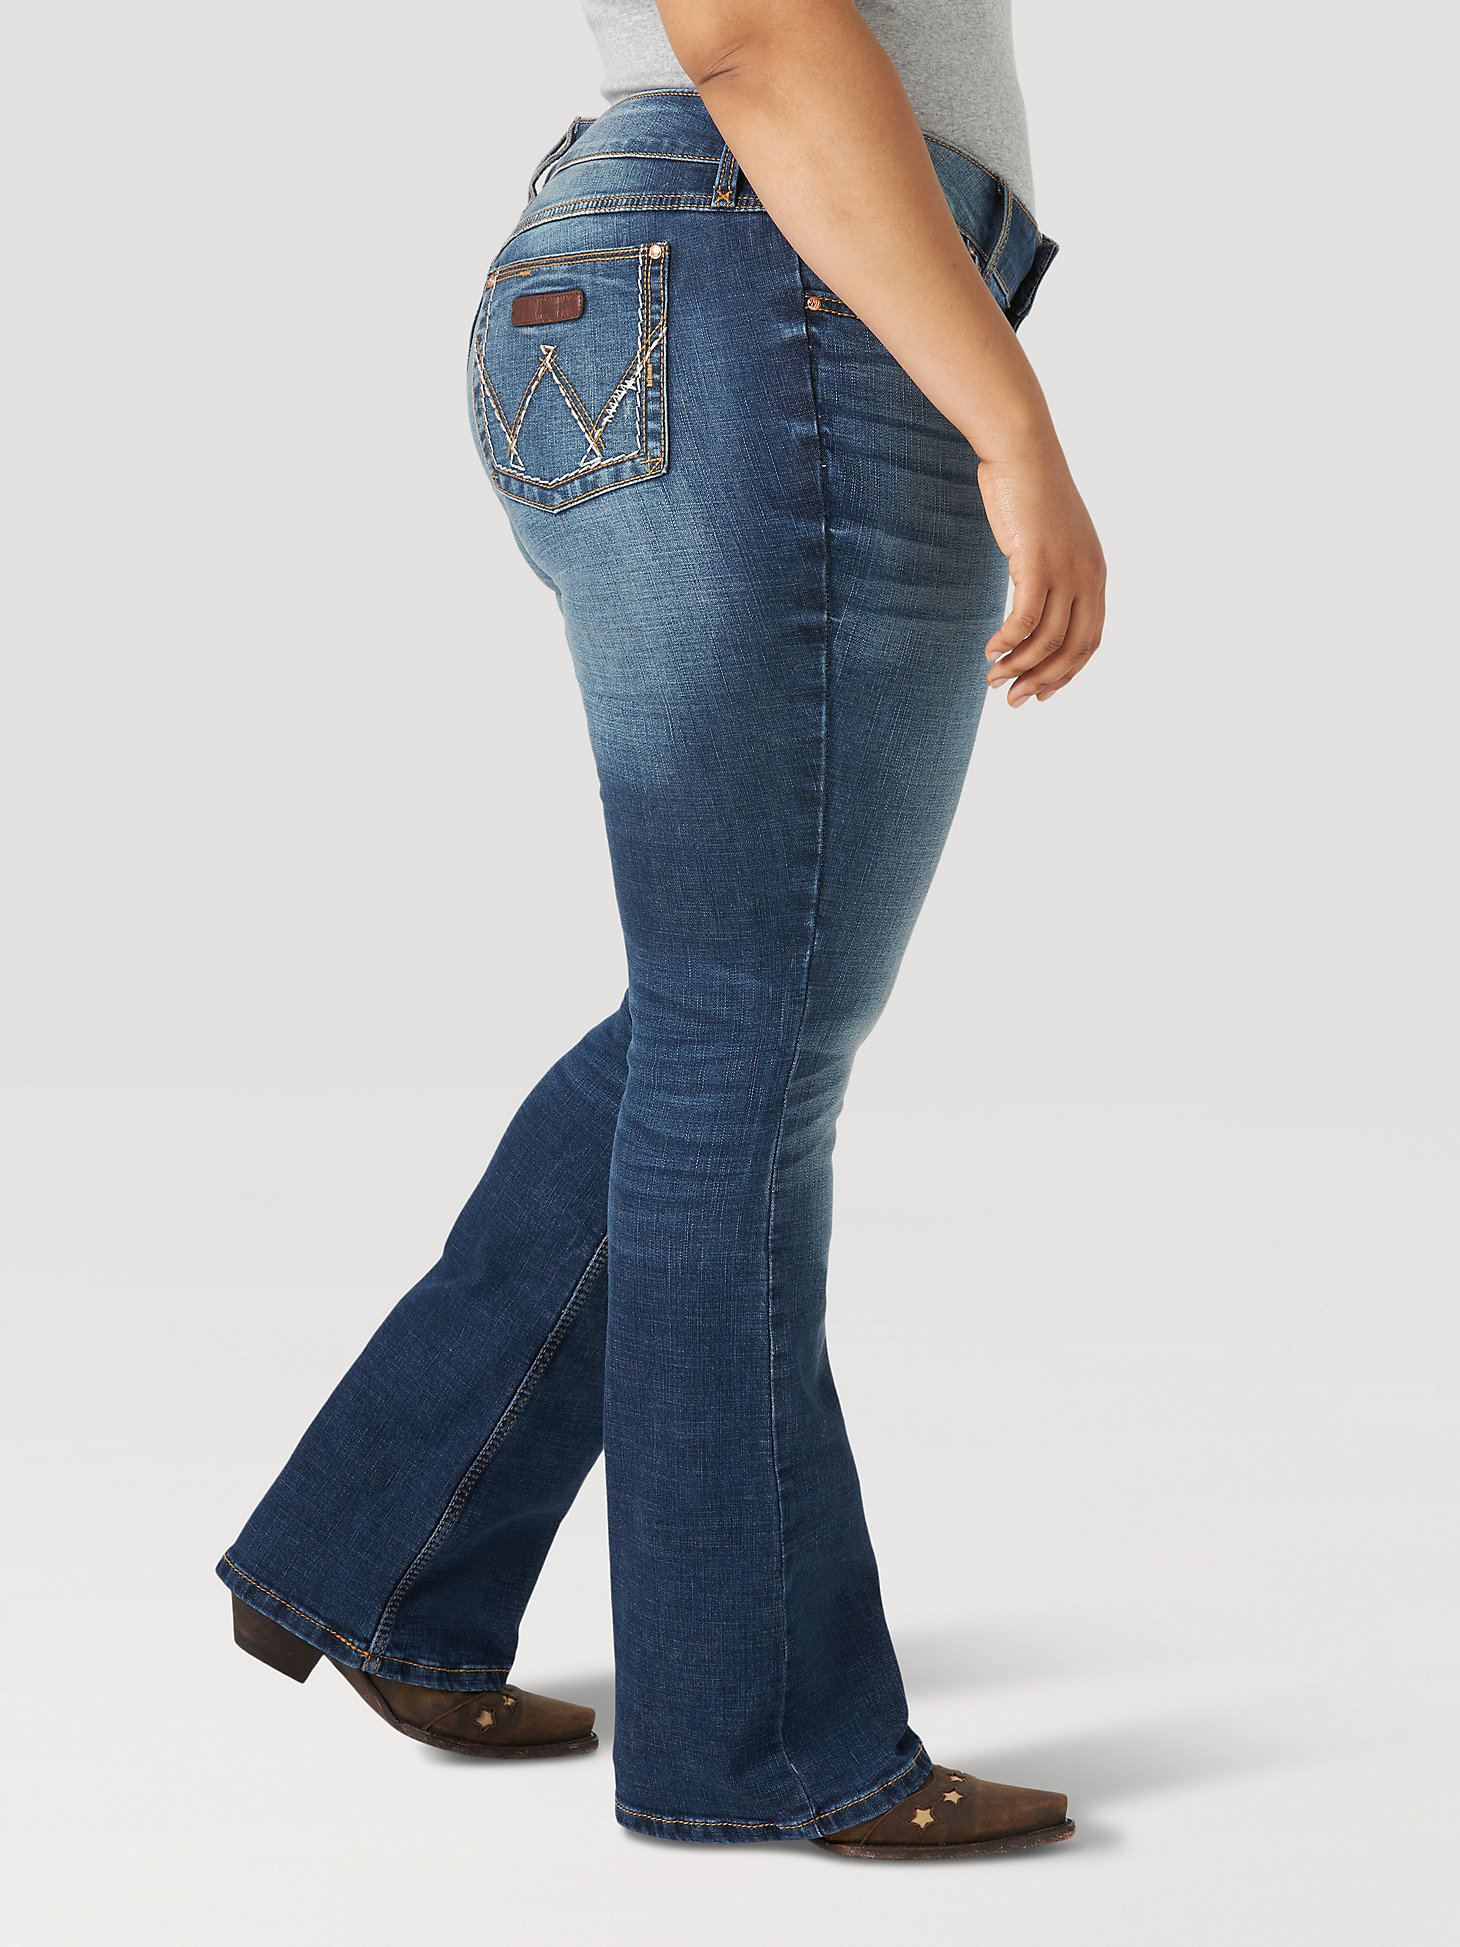 Wrangler Mae Cowgirl Draw Jeans 